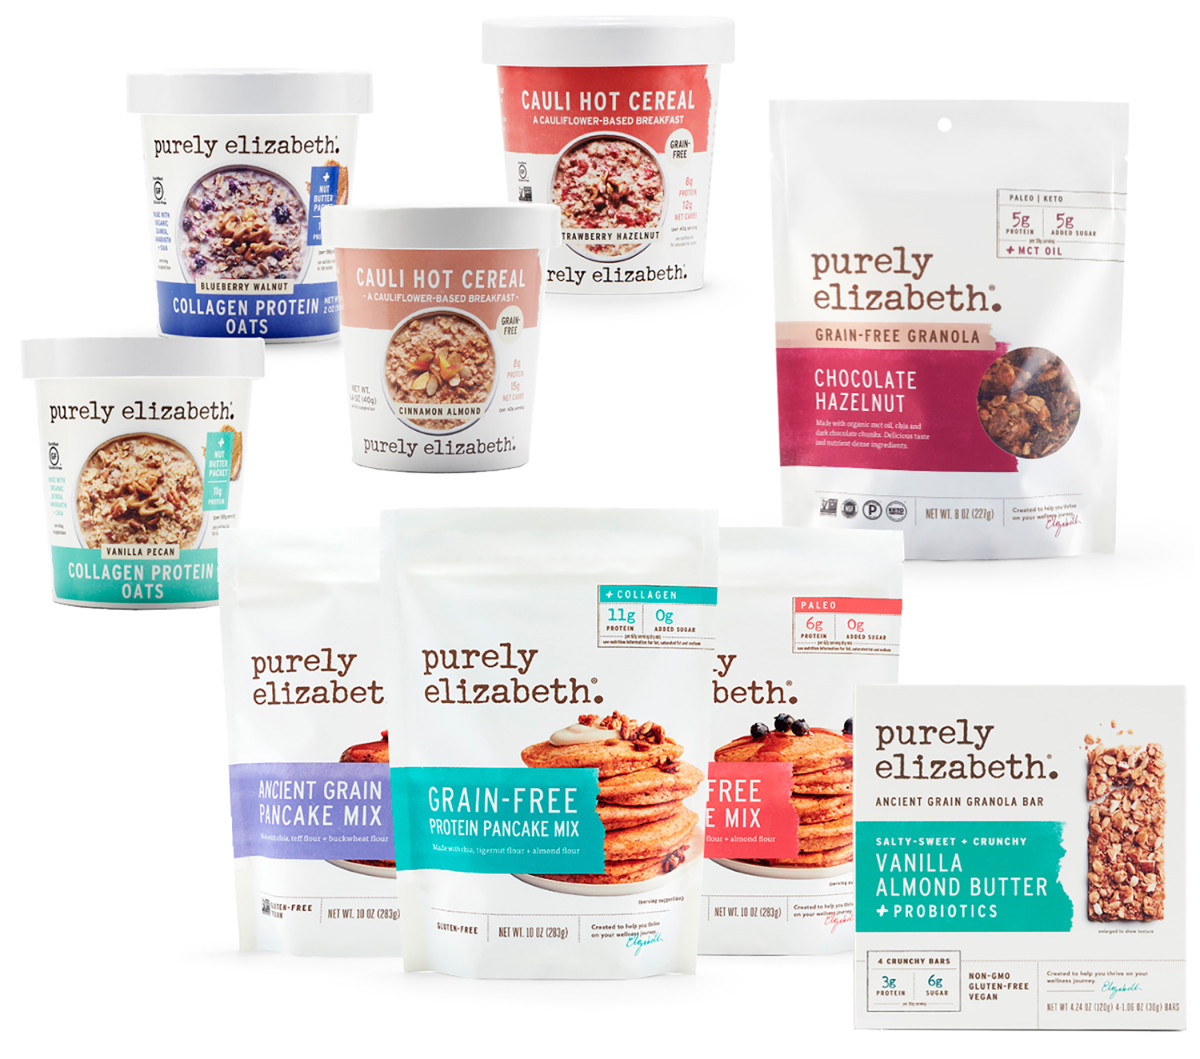 From grab-n-go oatmeal cups to granola bars, there are so many yummy options to choose from! View all Purely Elizabeth products here.